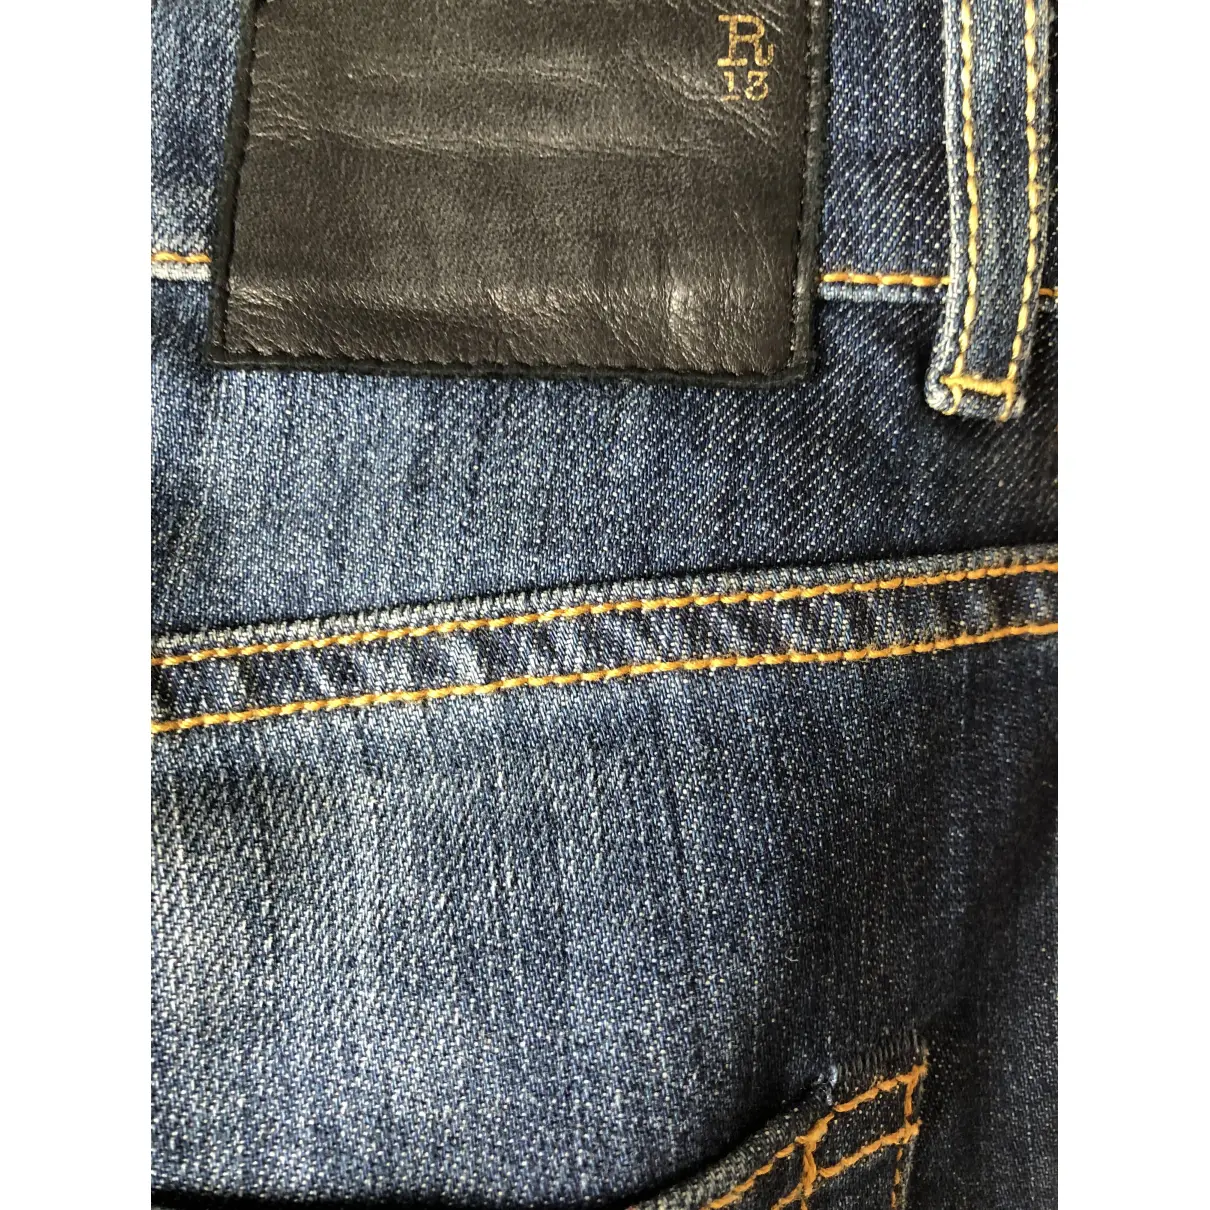 Straight jeans R13